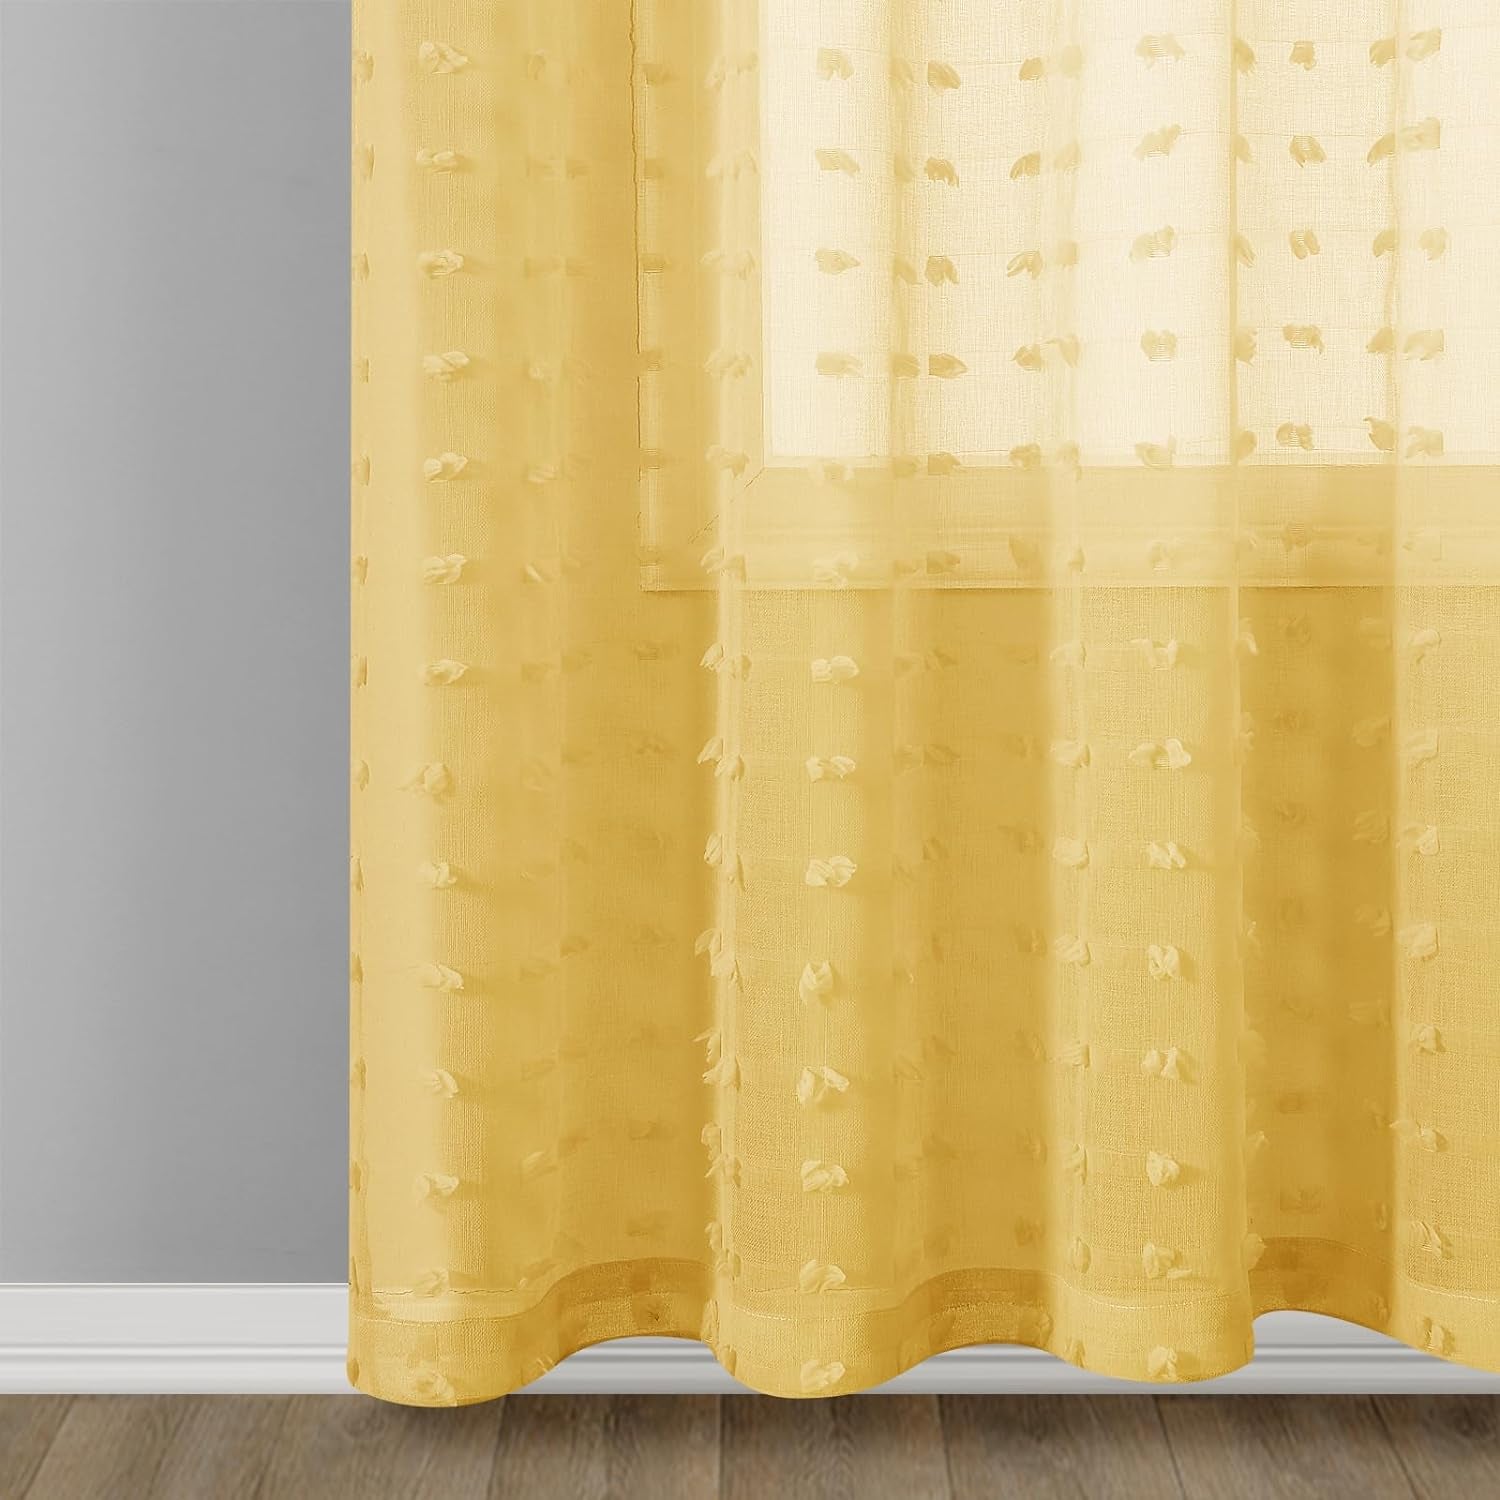 Guken Yellow Semi Sheer Curtains 90 Inches Long for Kids Bedroom Living Room Dining Room Textured Light Filtering Back Tab Rod Pocket Butterfly Cute Pom Pom Boho Drapes,52X90 Inches,2 Panels  Guken   